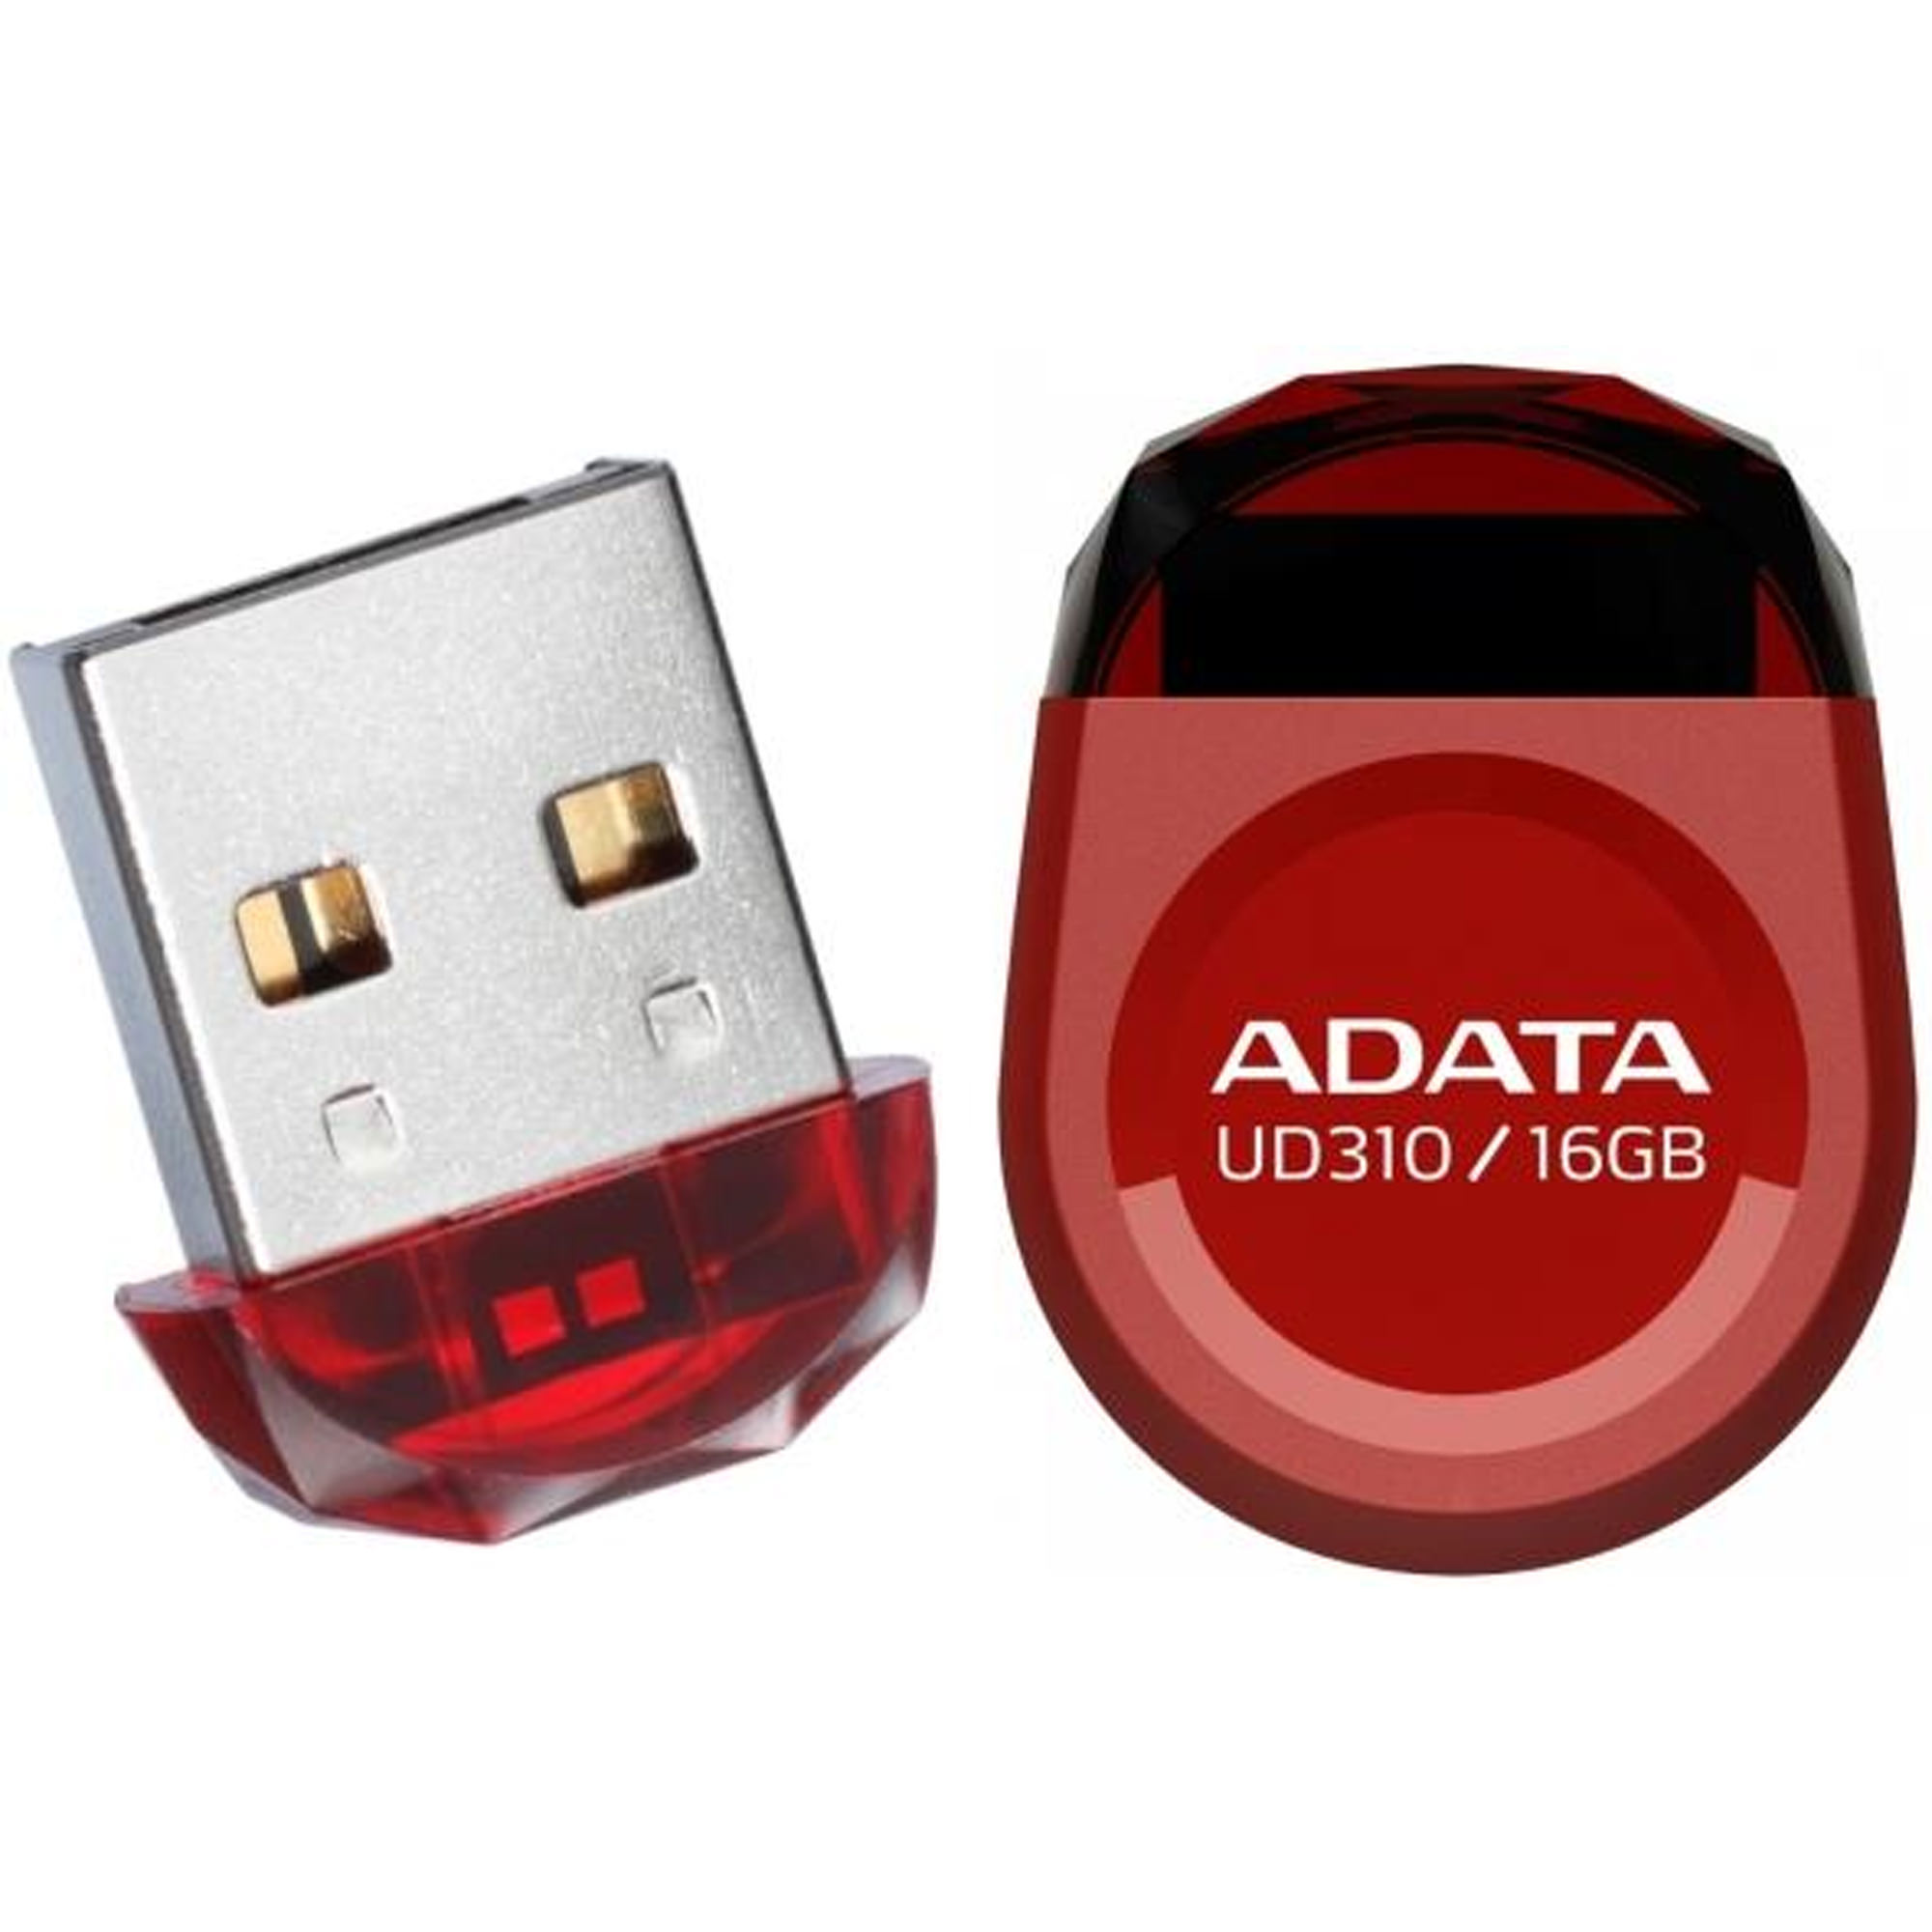 A-Data UD310 16GB RED RETAIL - image 2 of 2